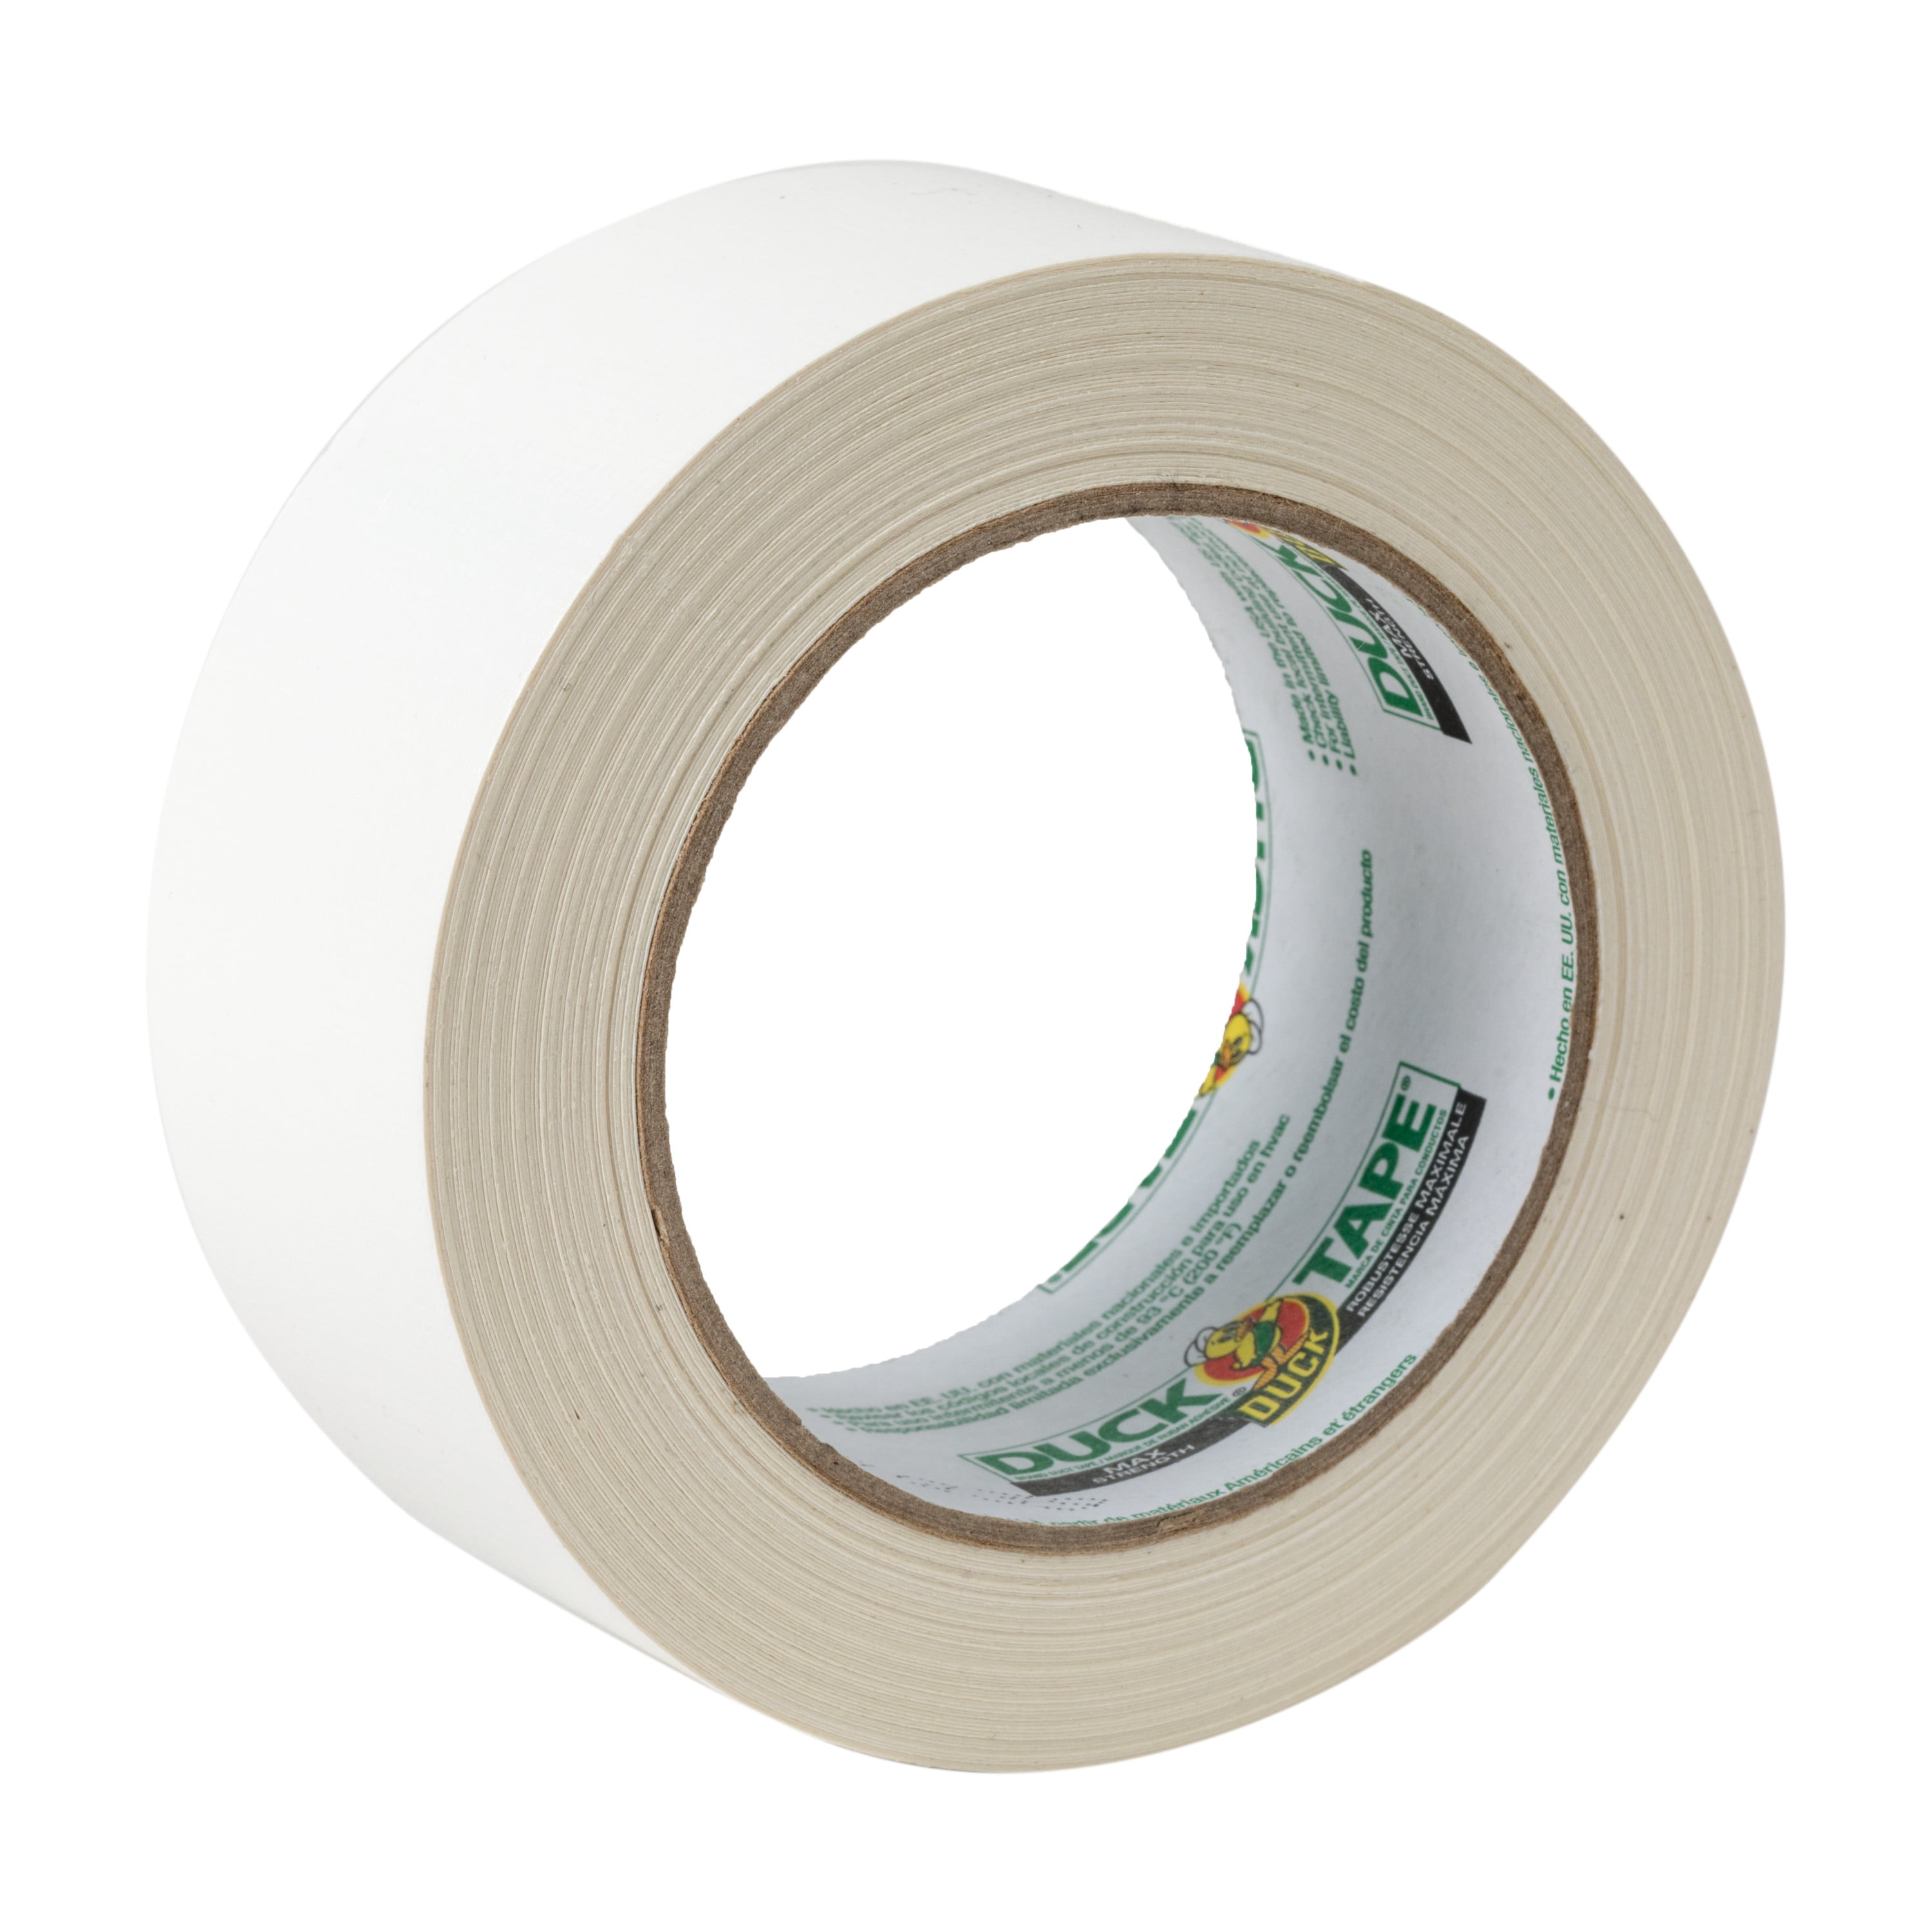 Maxwel Manufacturing Duct Tape White Heavy Duty - 1.88 in Wide 35 yds Waterproof Designs No Residue Strong Adhesive Industrial Grade Duct Tape